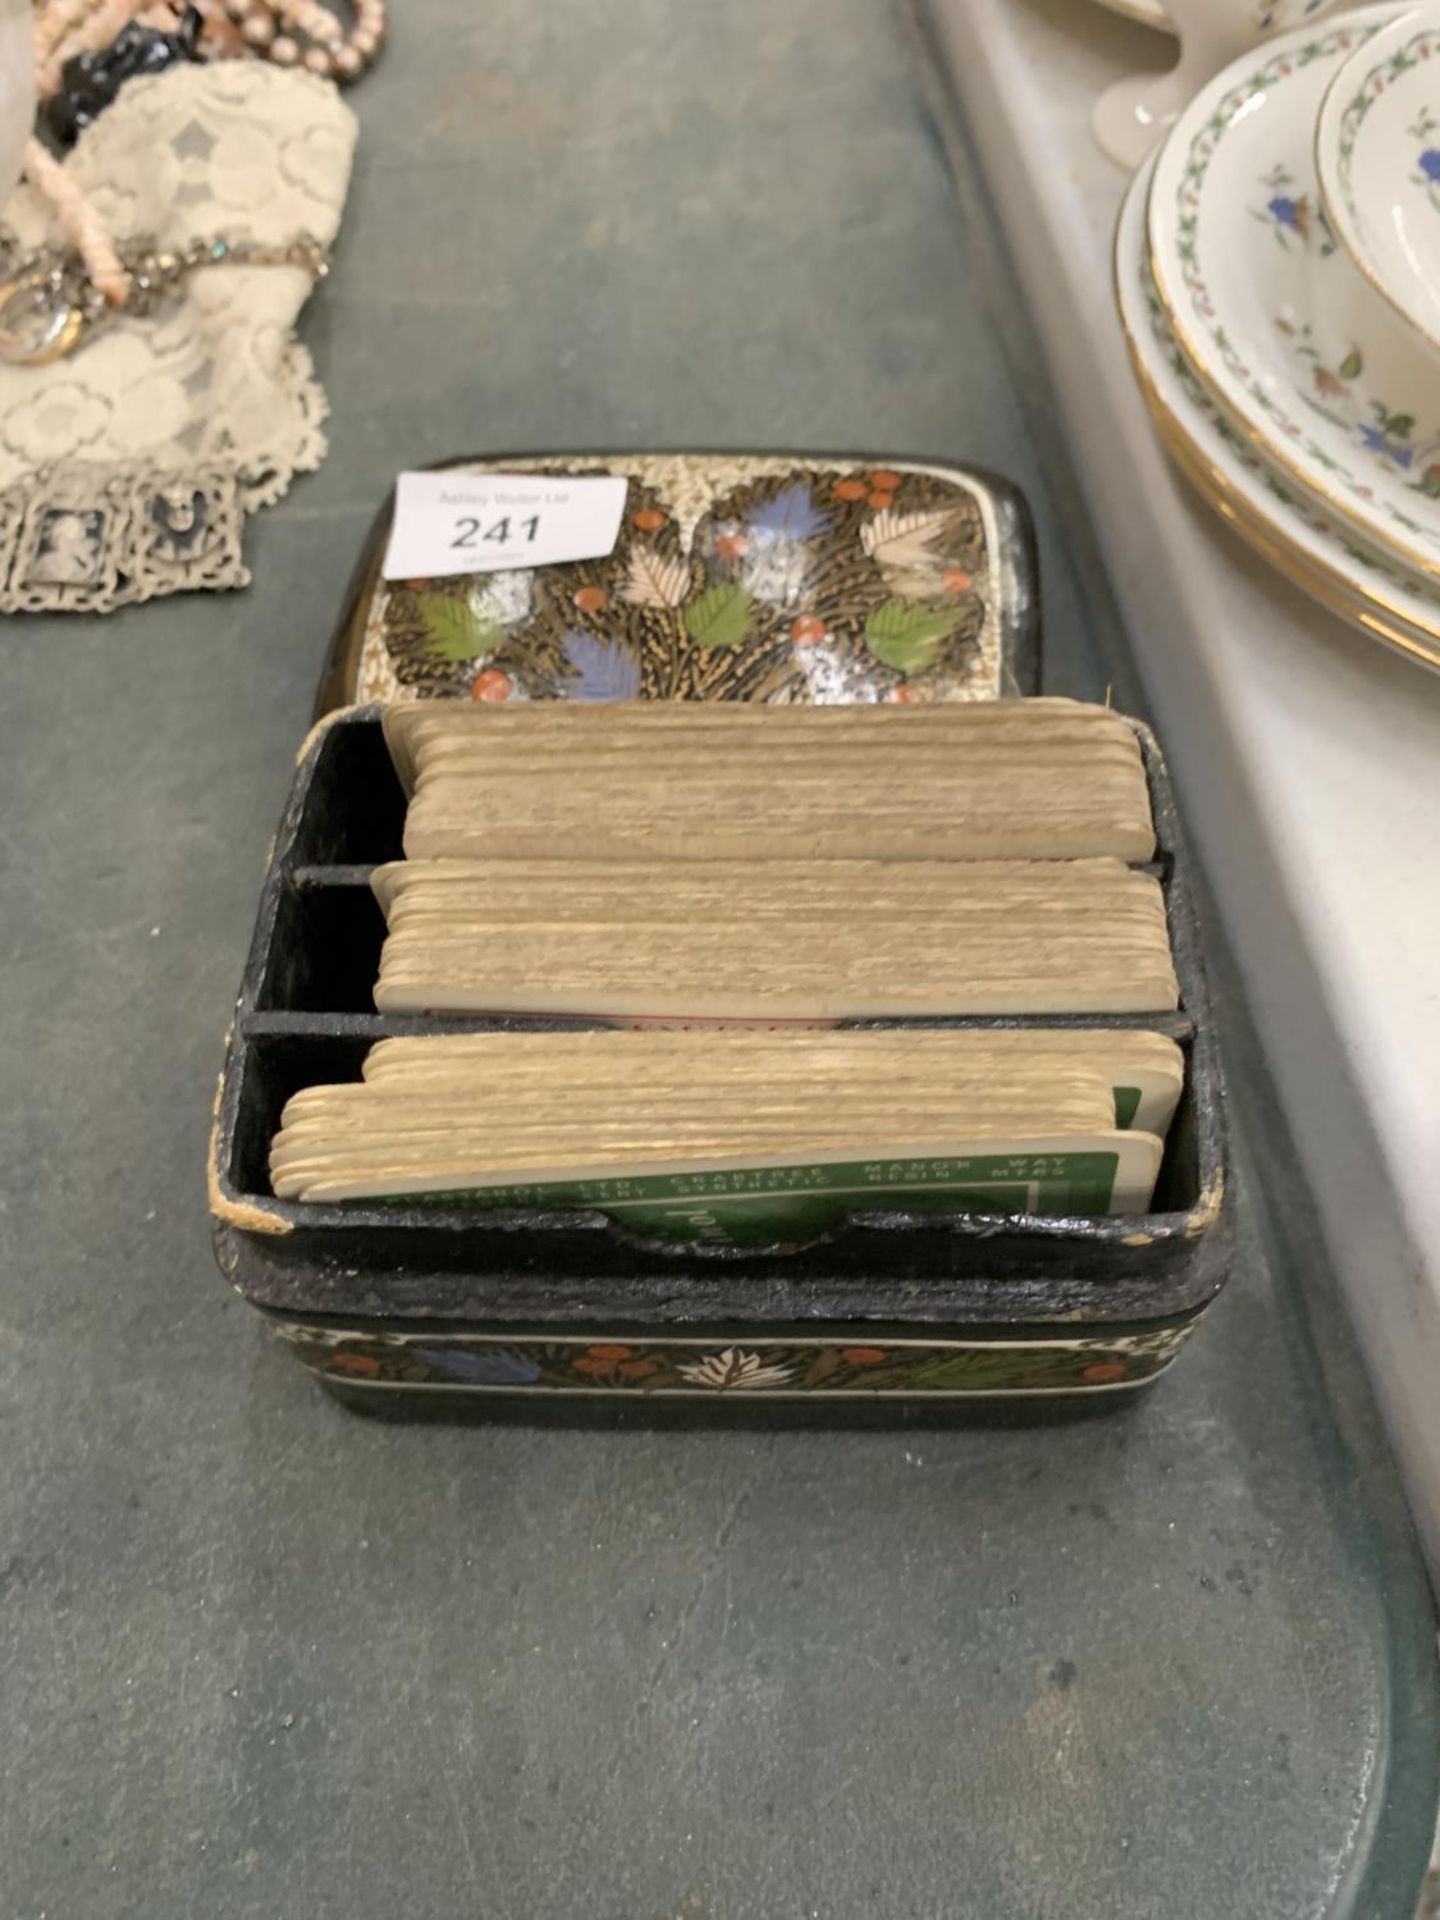 A HANDPAINTED BOX CONTAINING THREE SETS OF VINTAGE CARDS